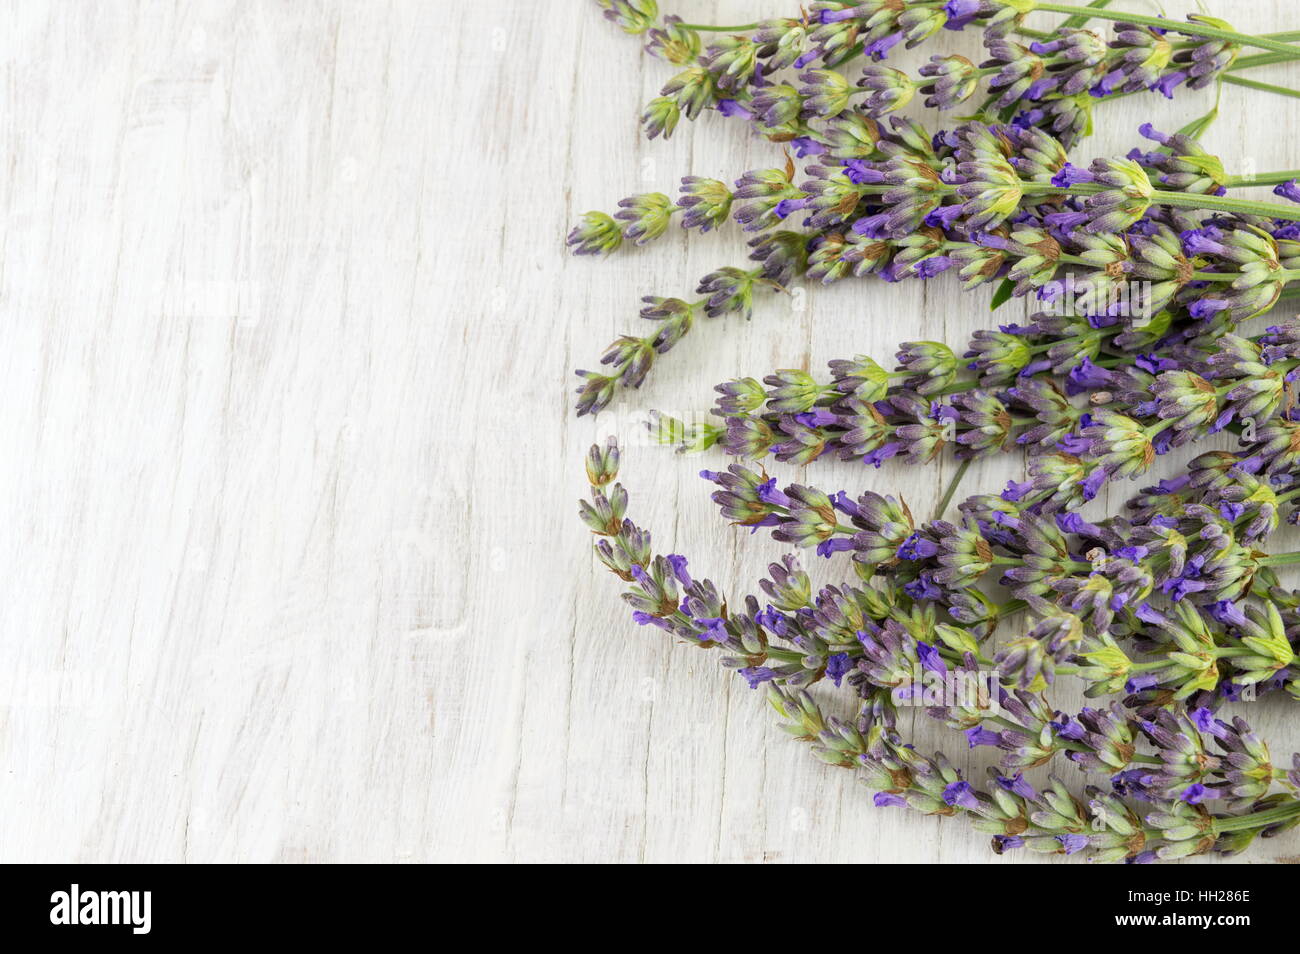 Lavender flower branches on a wooden table Stock Photo